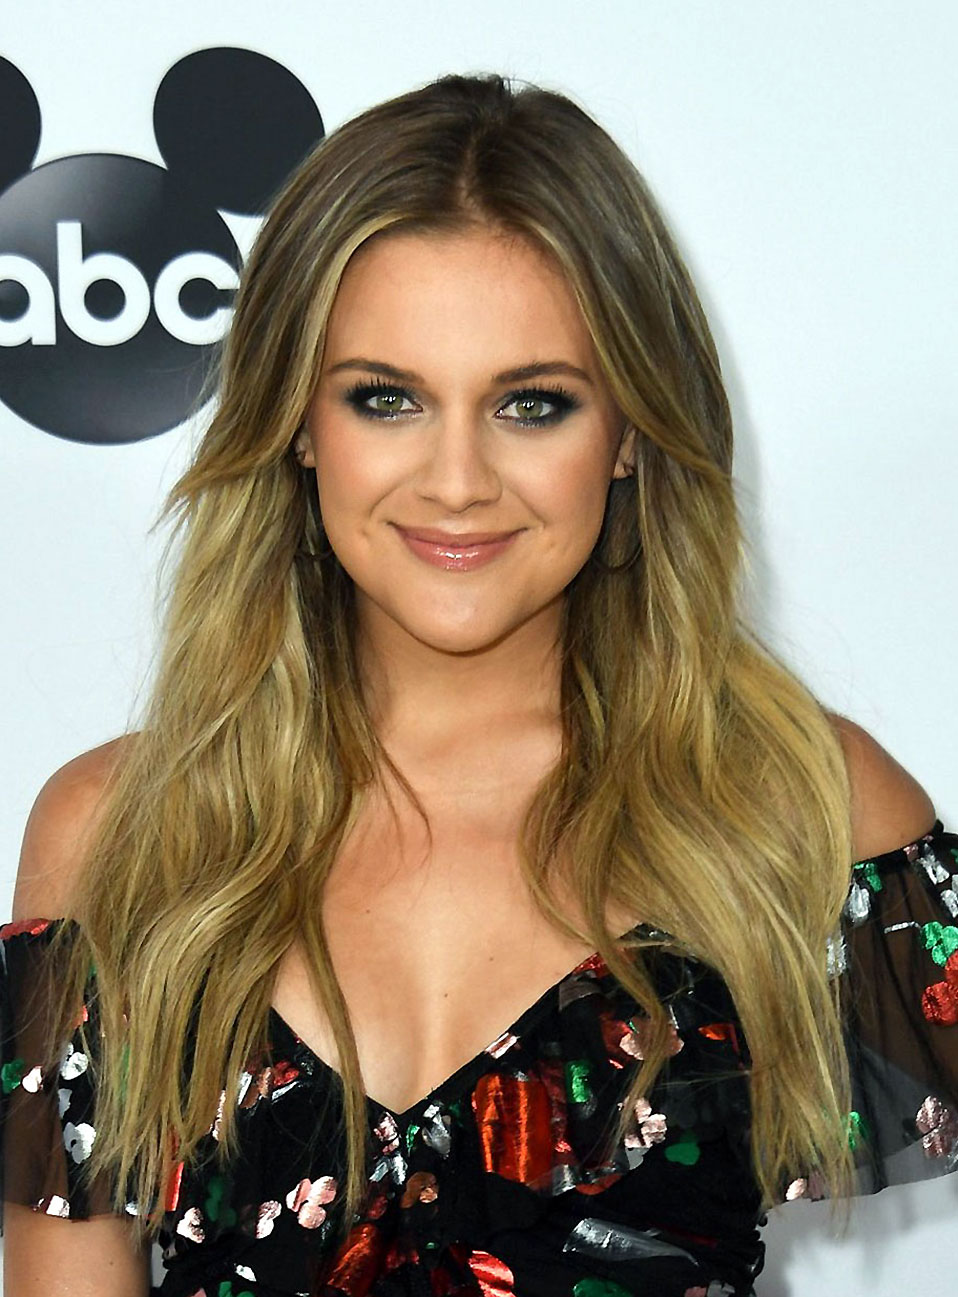 Kelsea Ballerini nude naked sexy topless cleavage boobs butt60